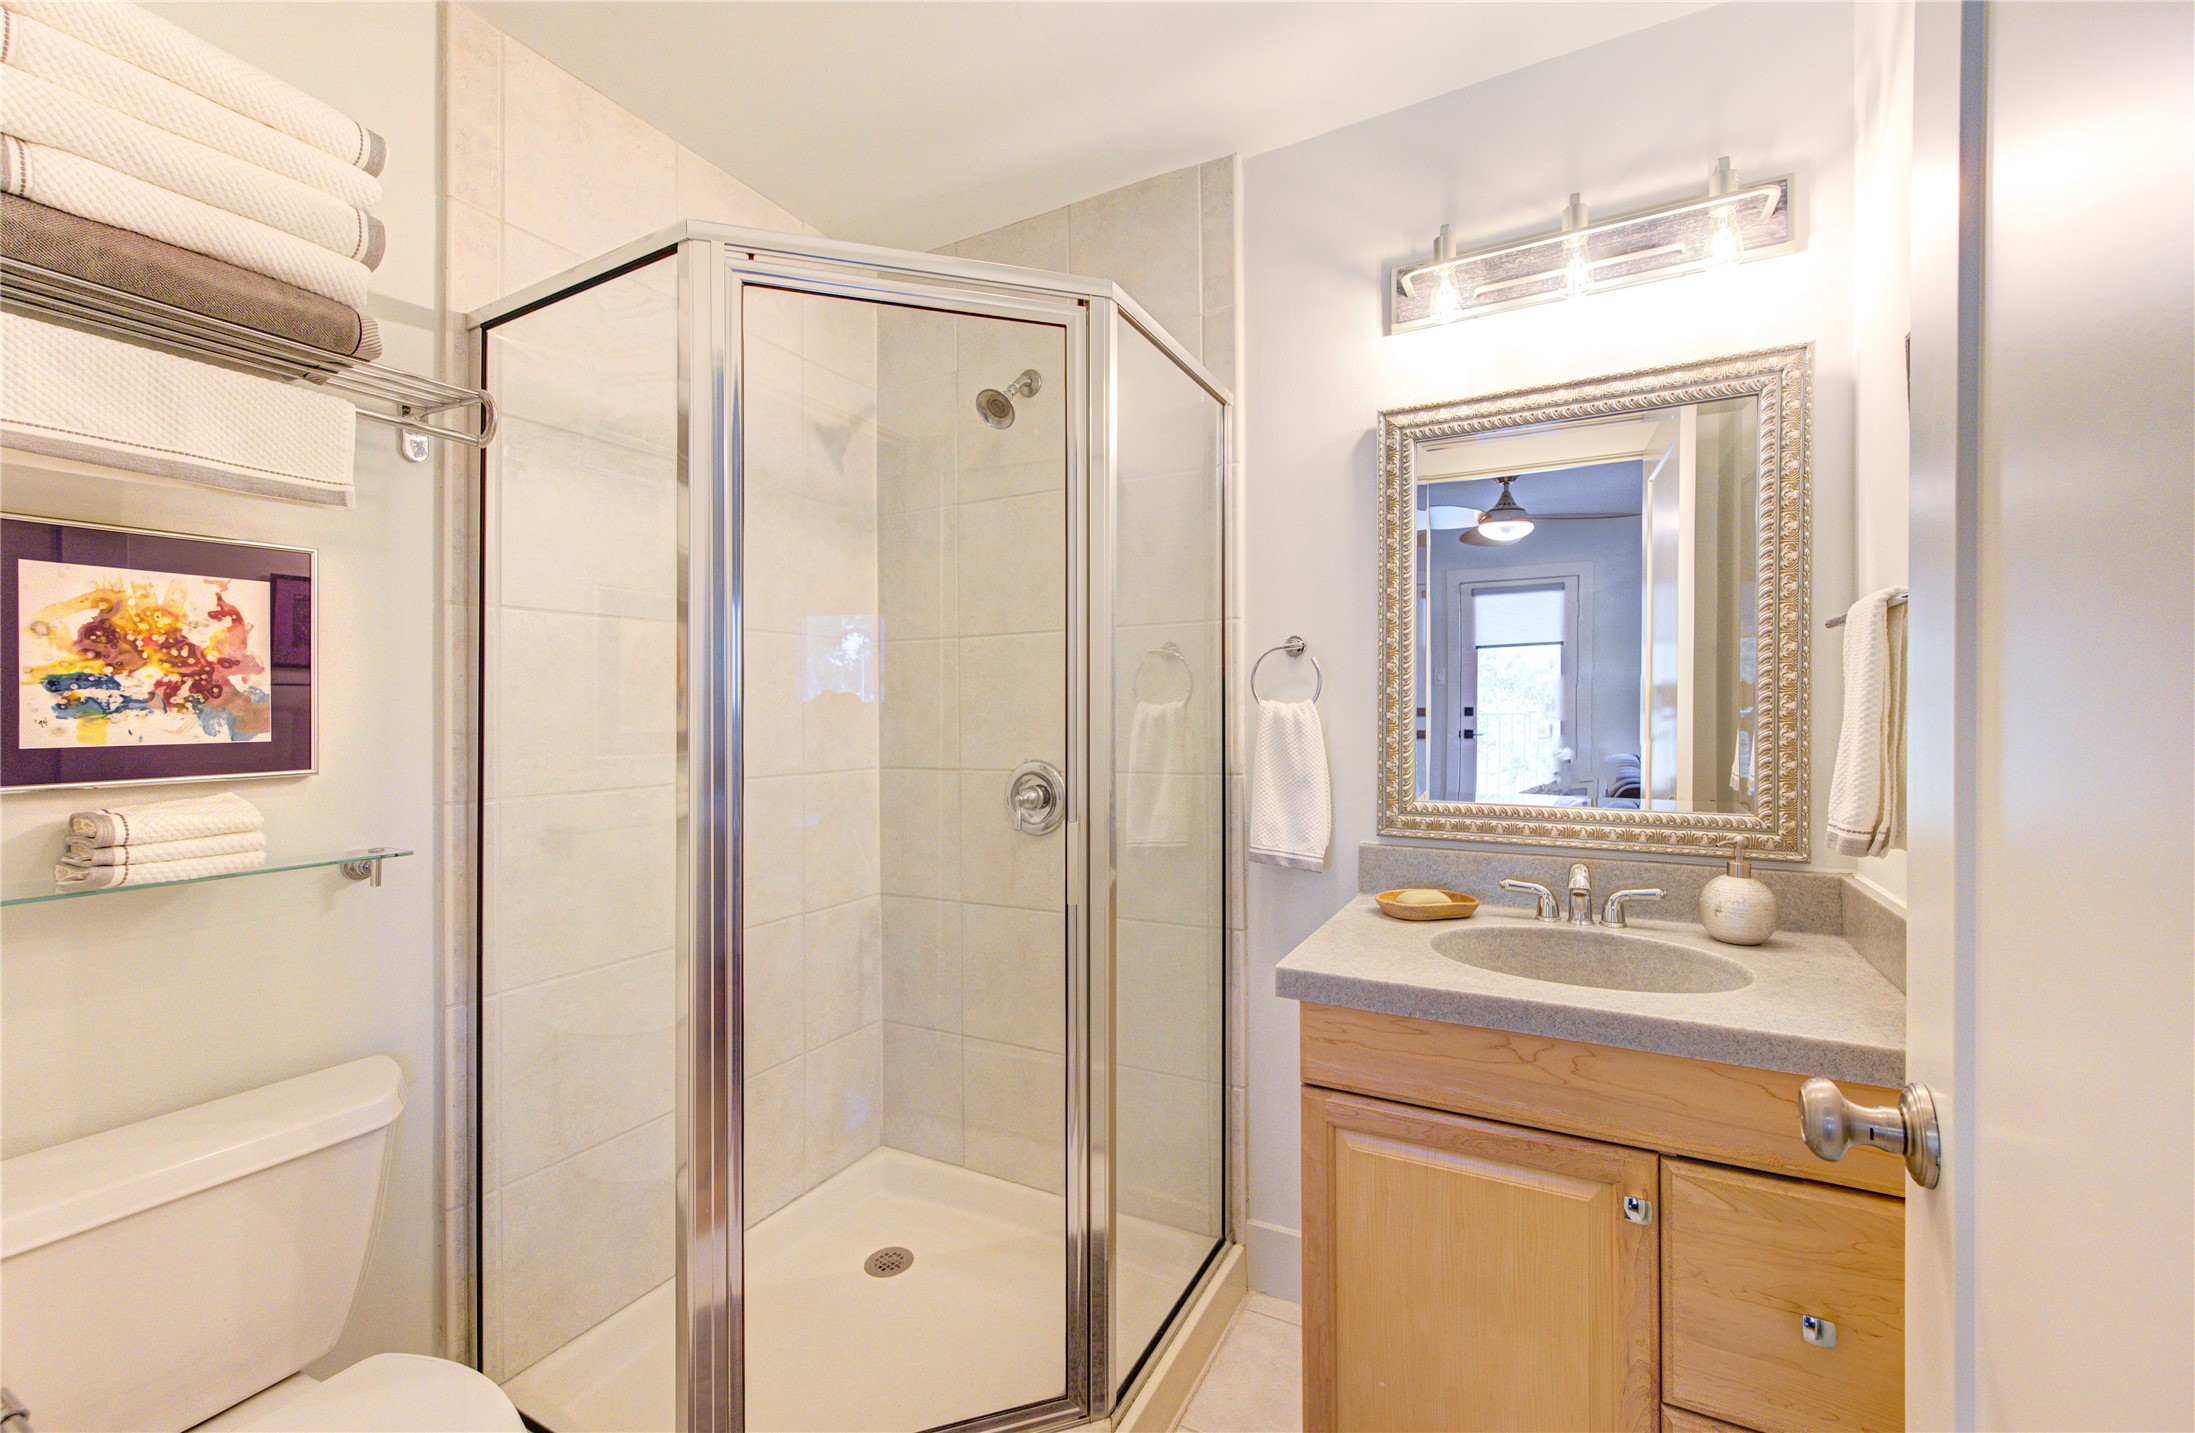 This bathroom boasts a walk-in shower and modern lighting.